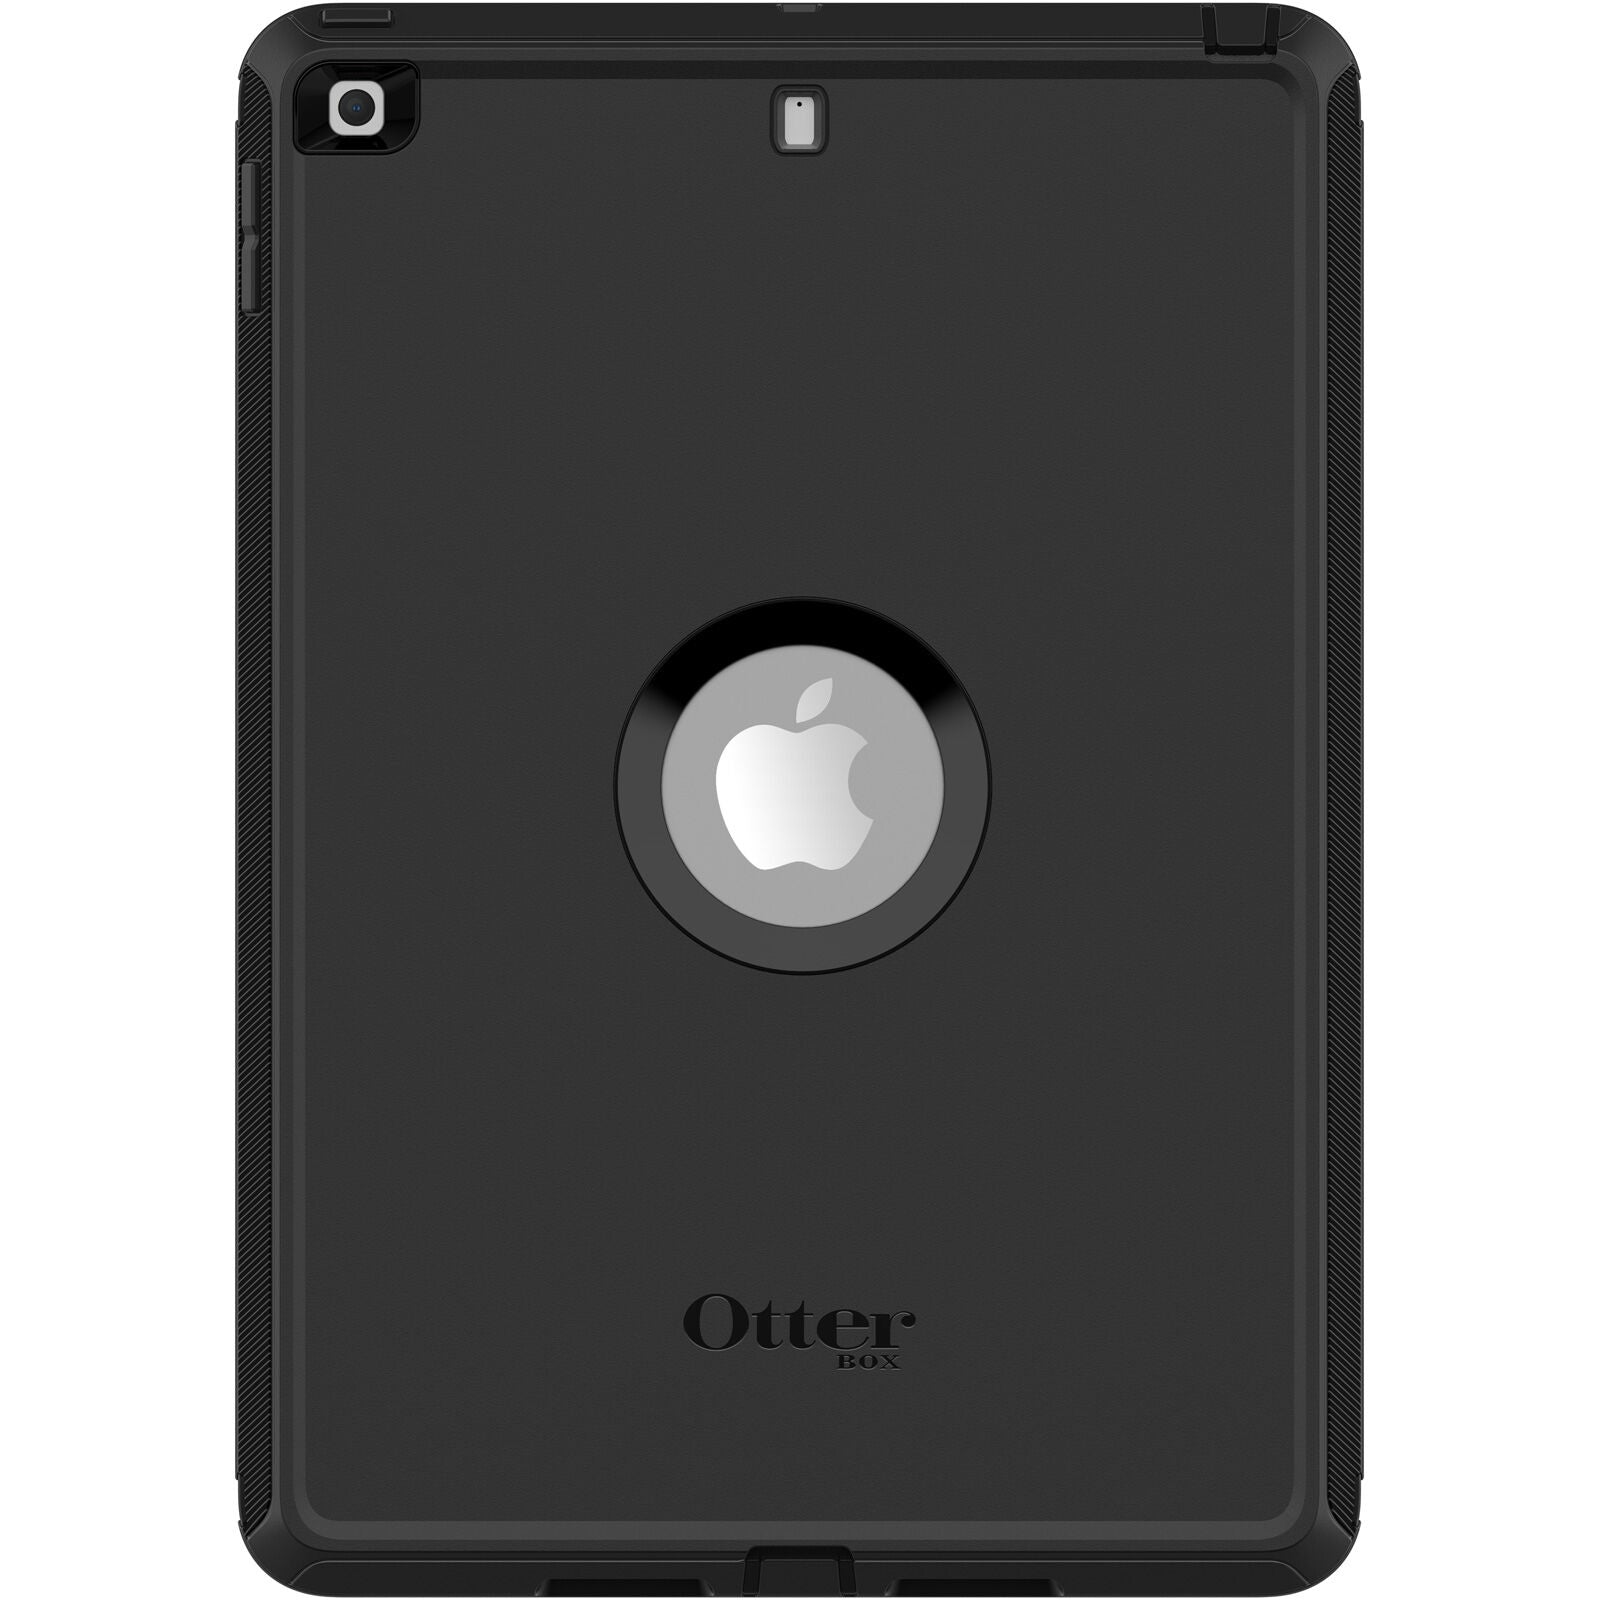 Defended Series Case for iPad 10.2" [7th/8th/9th Gen] (Black)